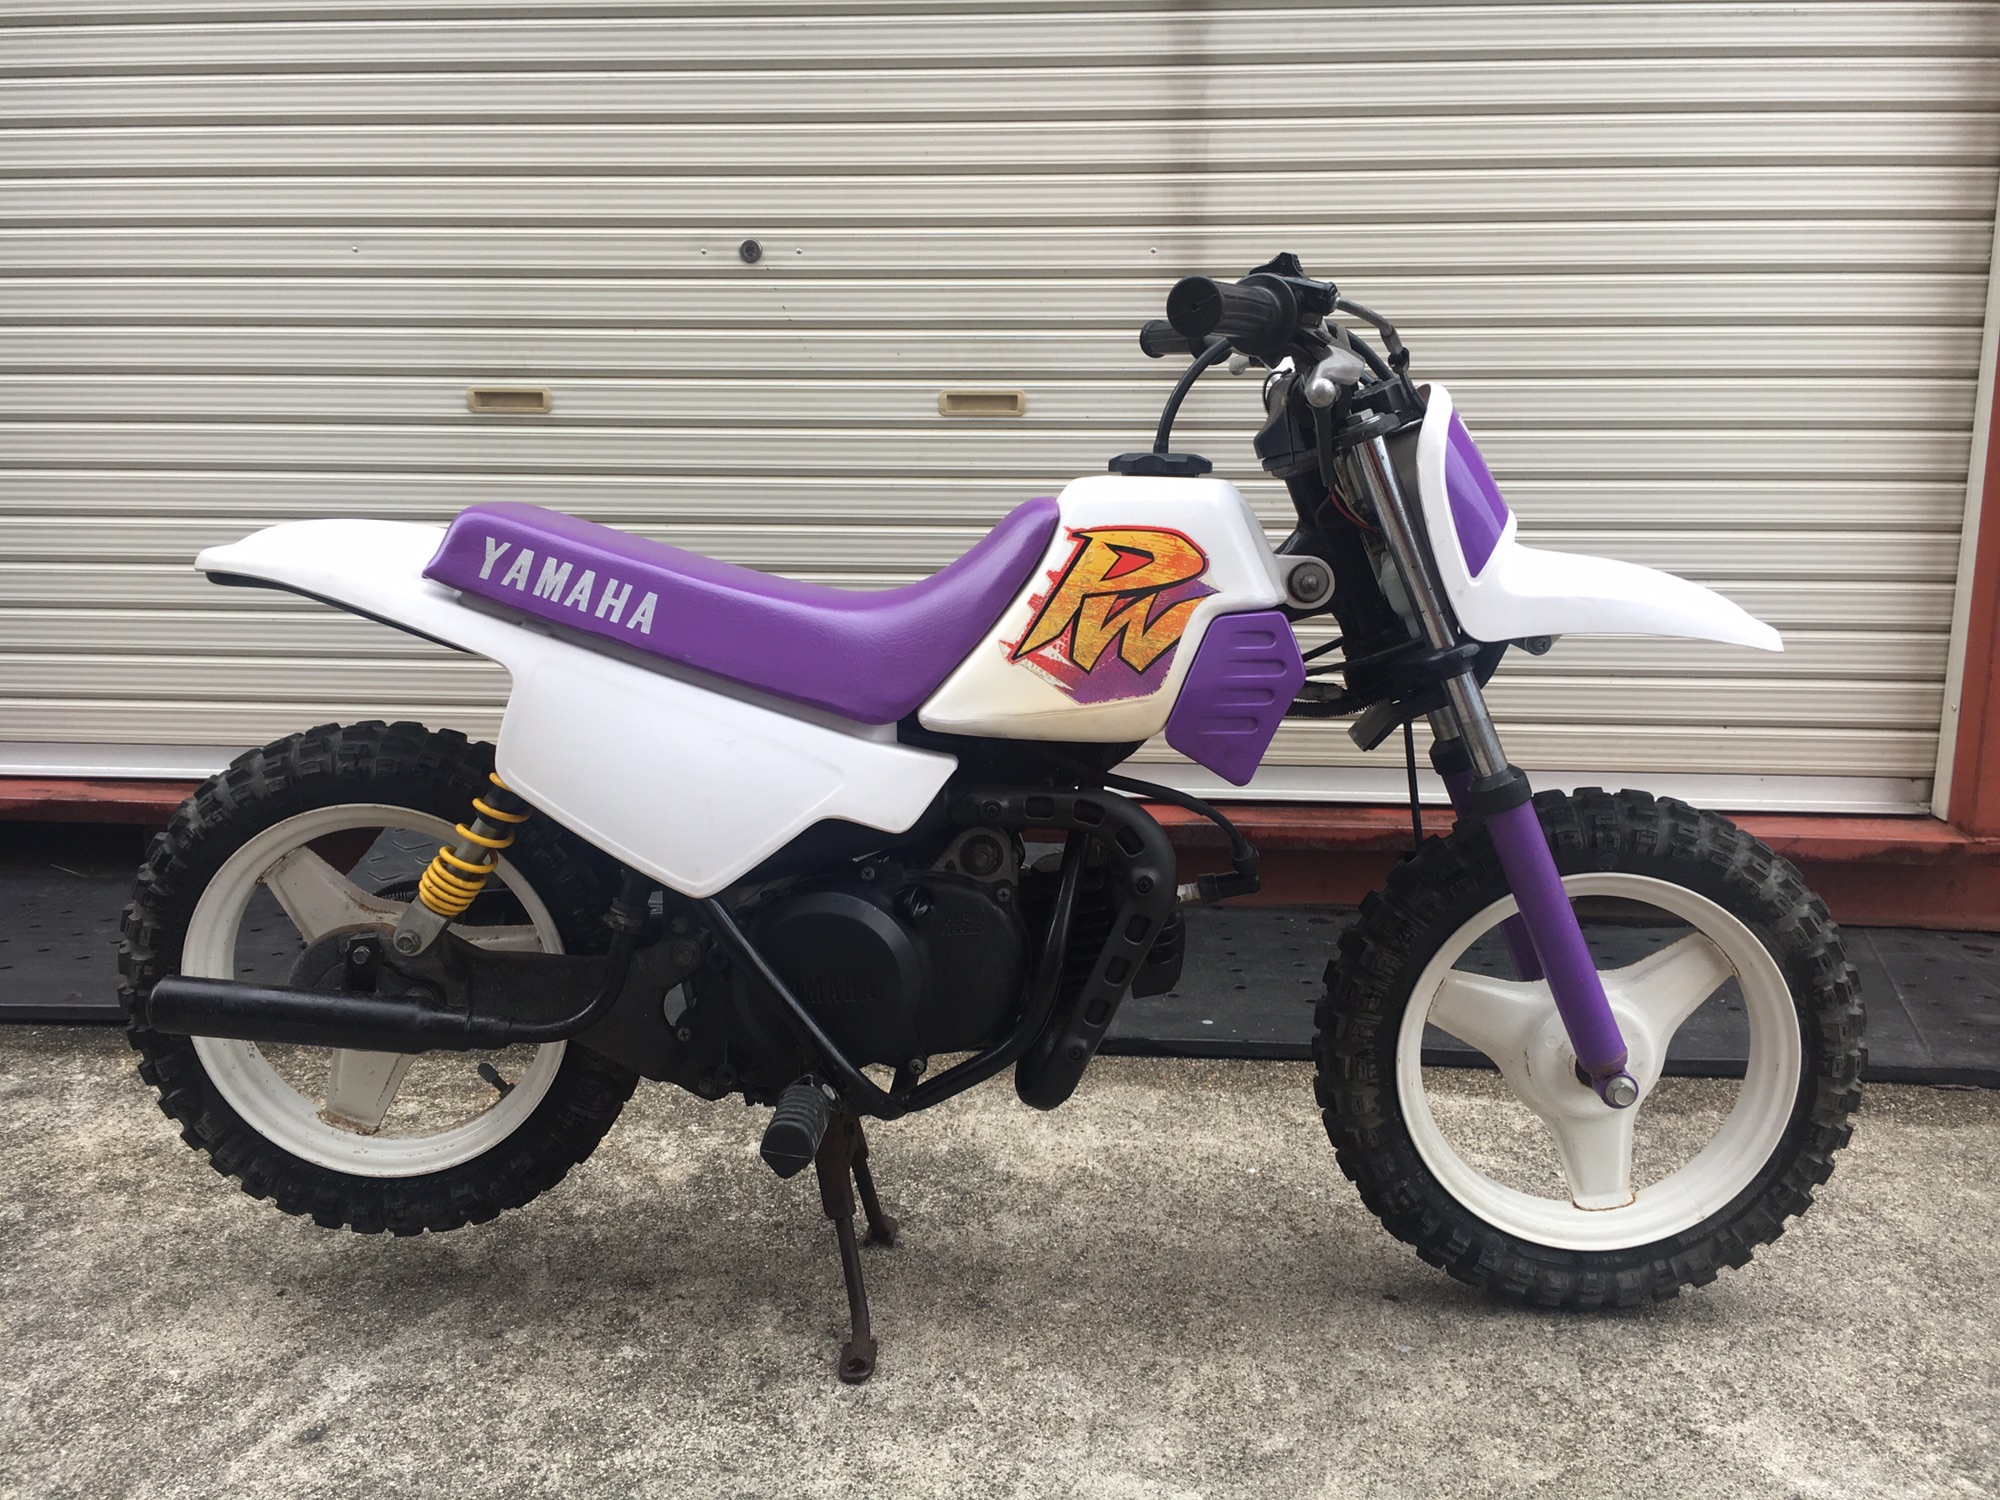 PW50 エンジンOH ピストン、キャブ新品 SOLD OUT10万円 | 三重県桑名市